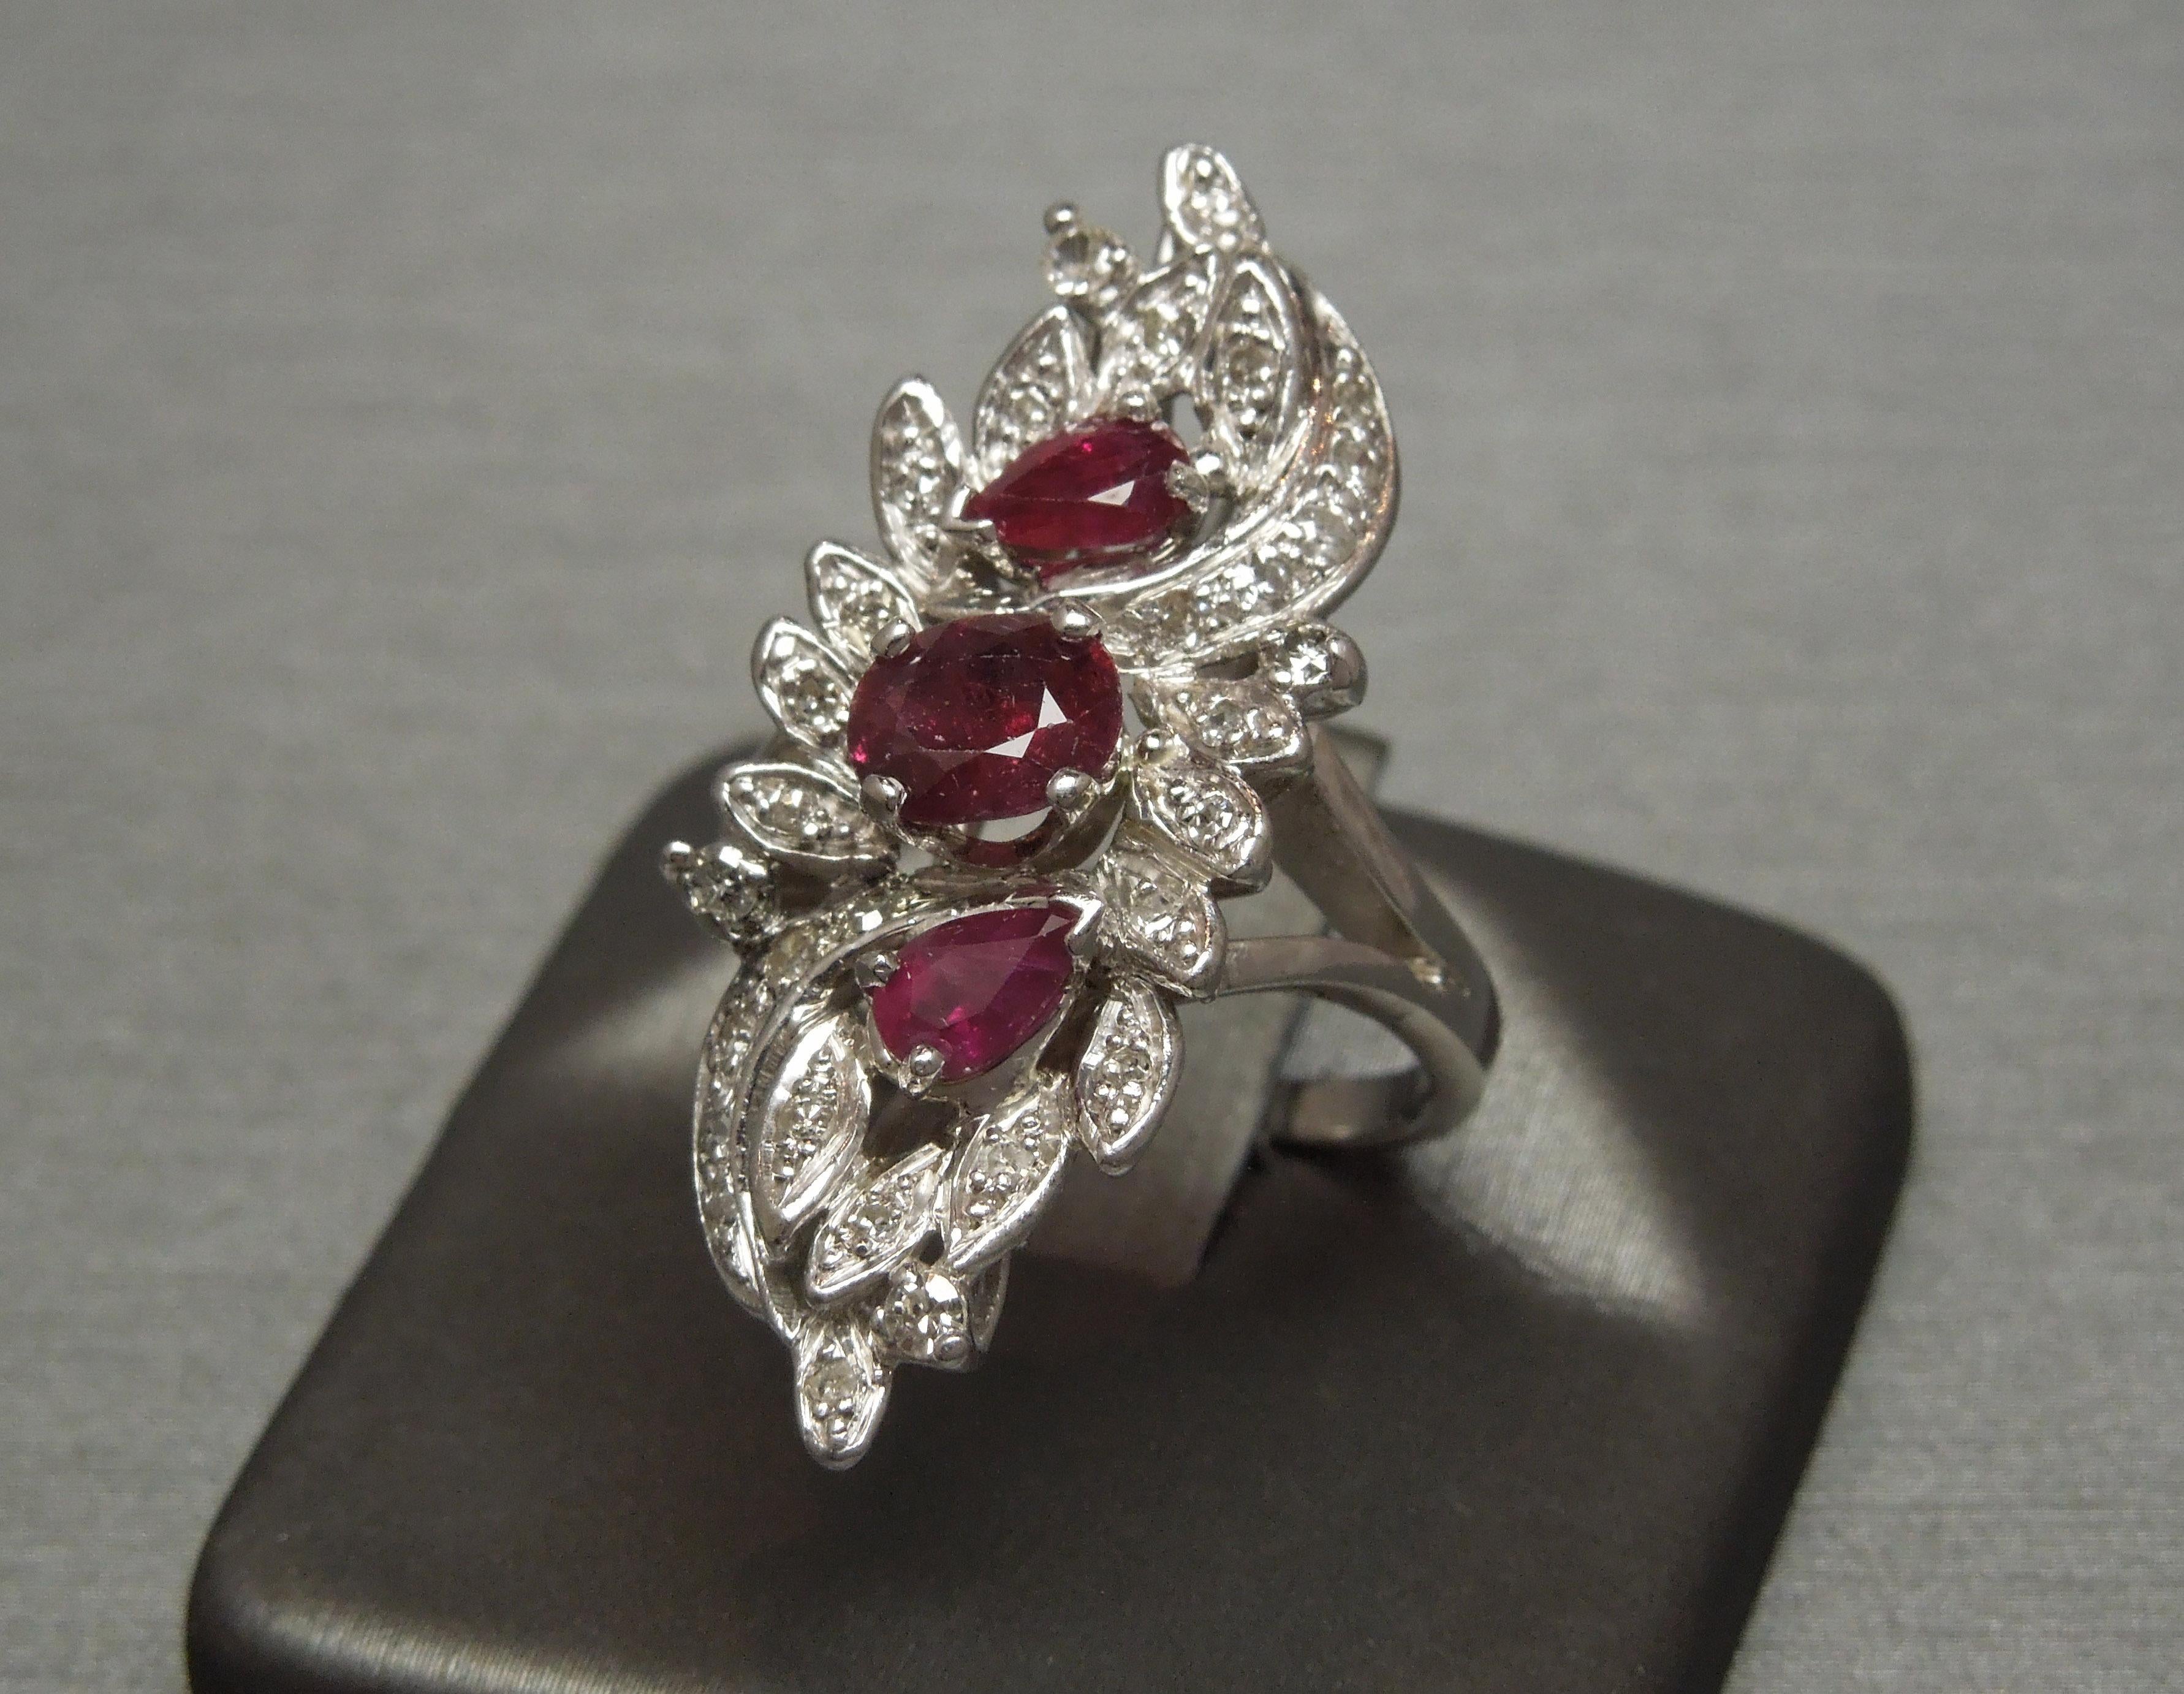 This Ruby Bouquet Ring features three focal Natural Medium Red Rubies (slightly opaque) - a central 1 carat Oval cut with 2 slightly smaller Pear cuts totaling 0.75 carats. Ruby is noted as the 